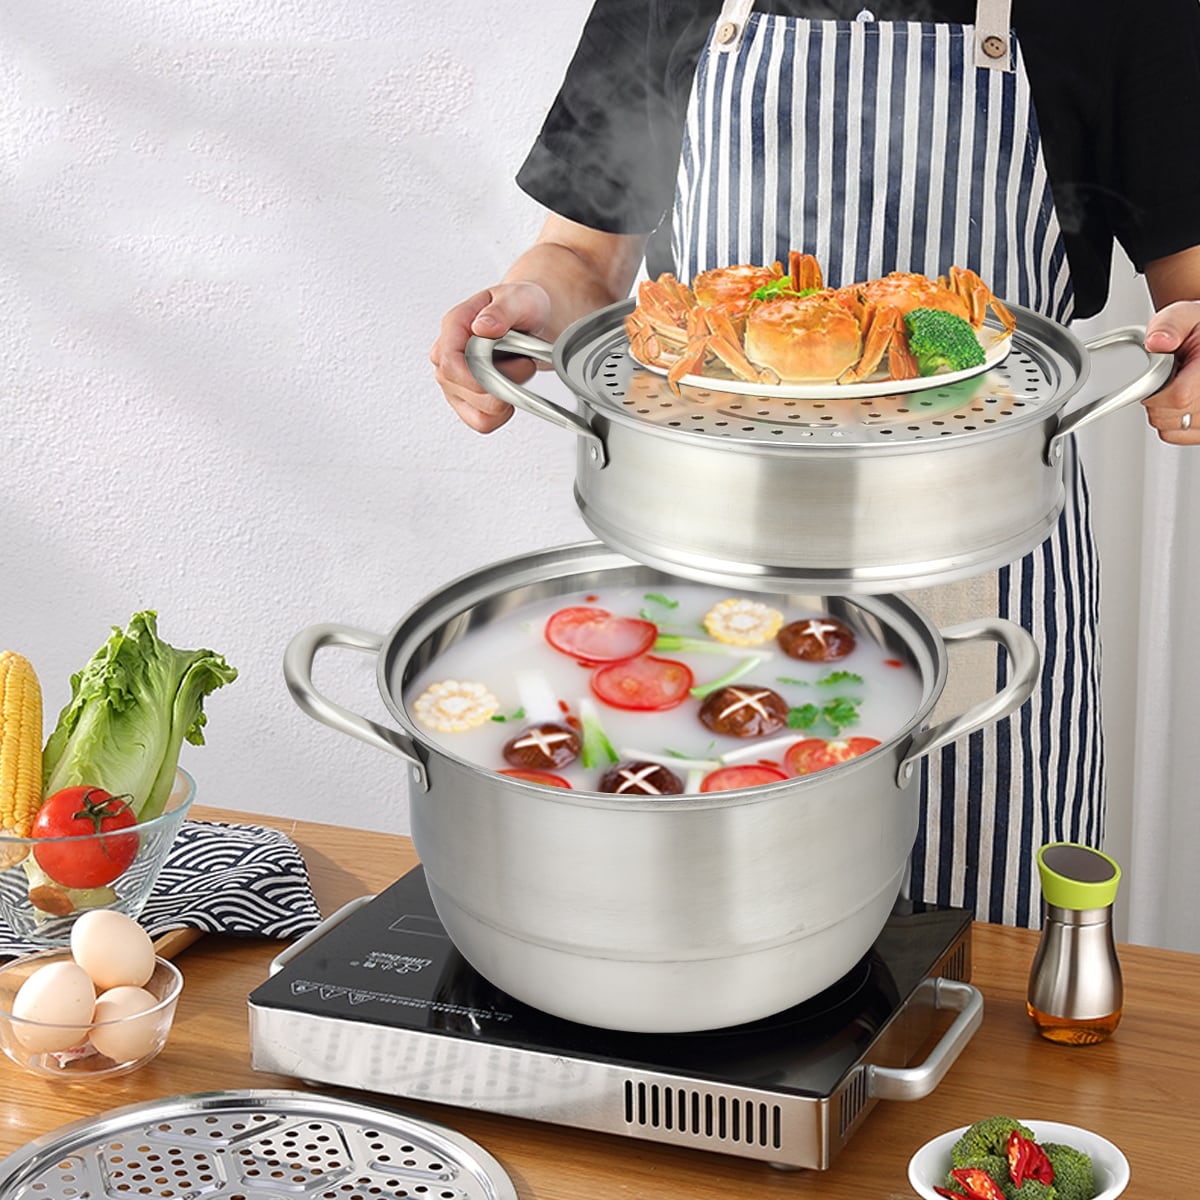 https://ak1.ostkcdn.com/images/products/is/images/direct/2a33c0ad1593f8ee2bb792a1167cb69581b1867b/Costway-3-Tier-11-Inch-Stainless-Steel-Steamer-Set-Cookware-Pot.jpg